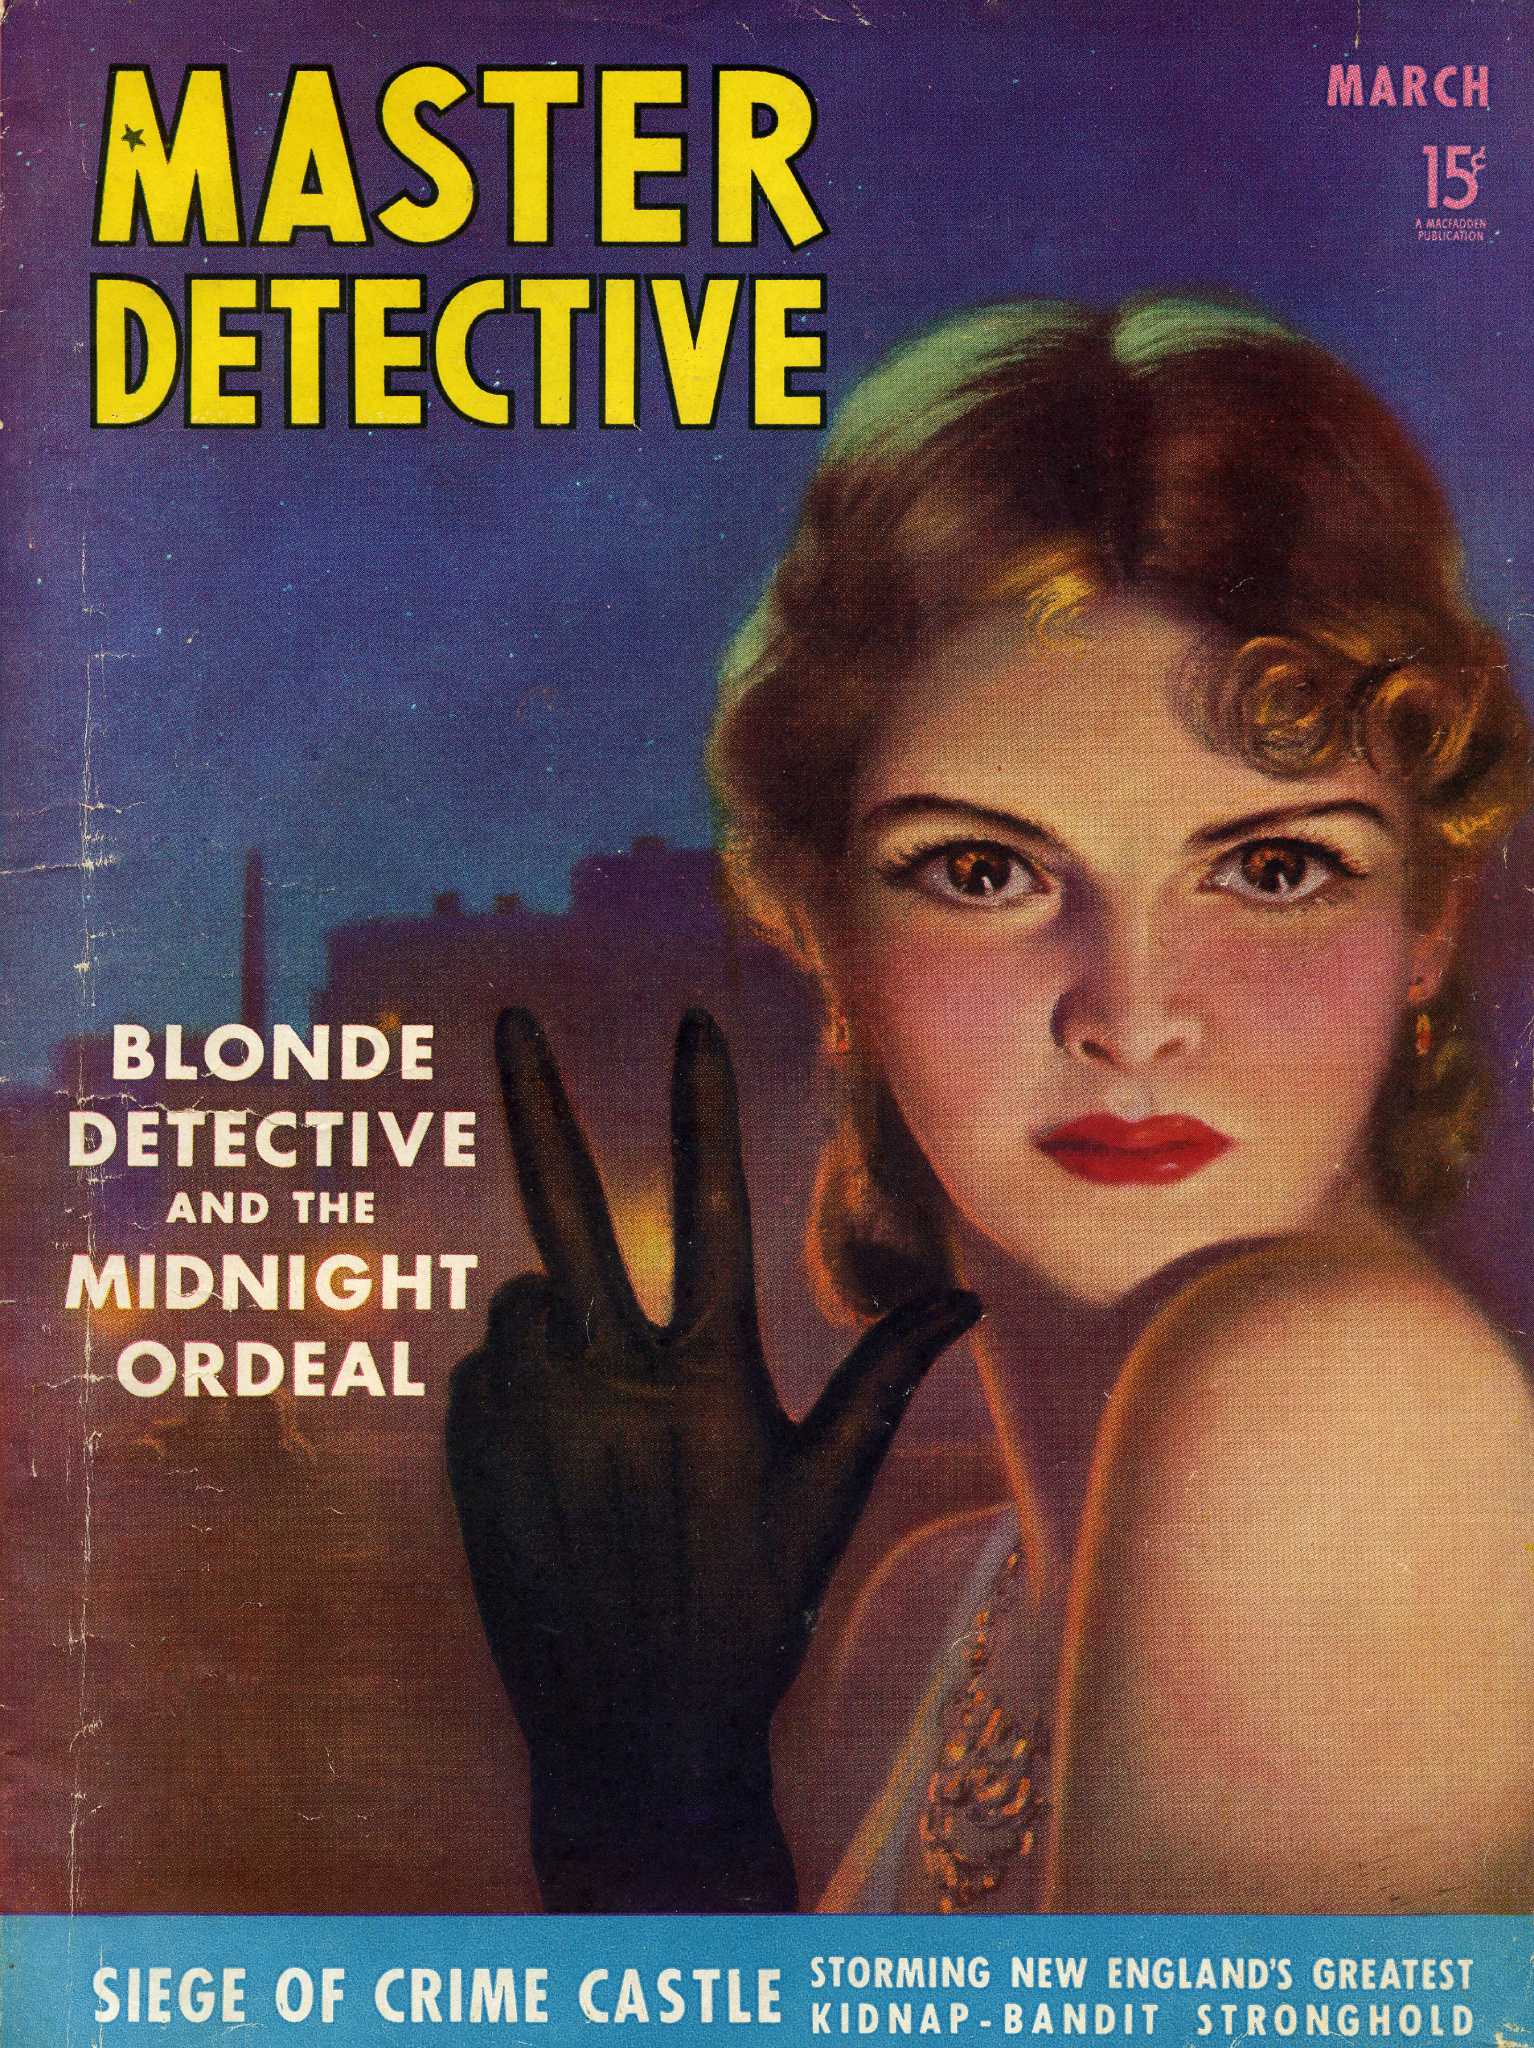 Detective magazines from the 1930s and 1940s.